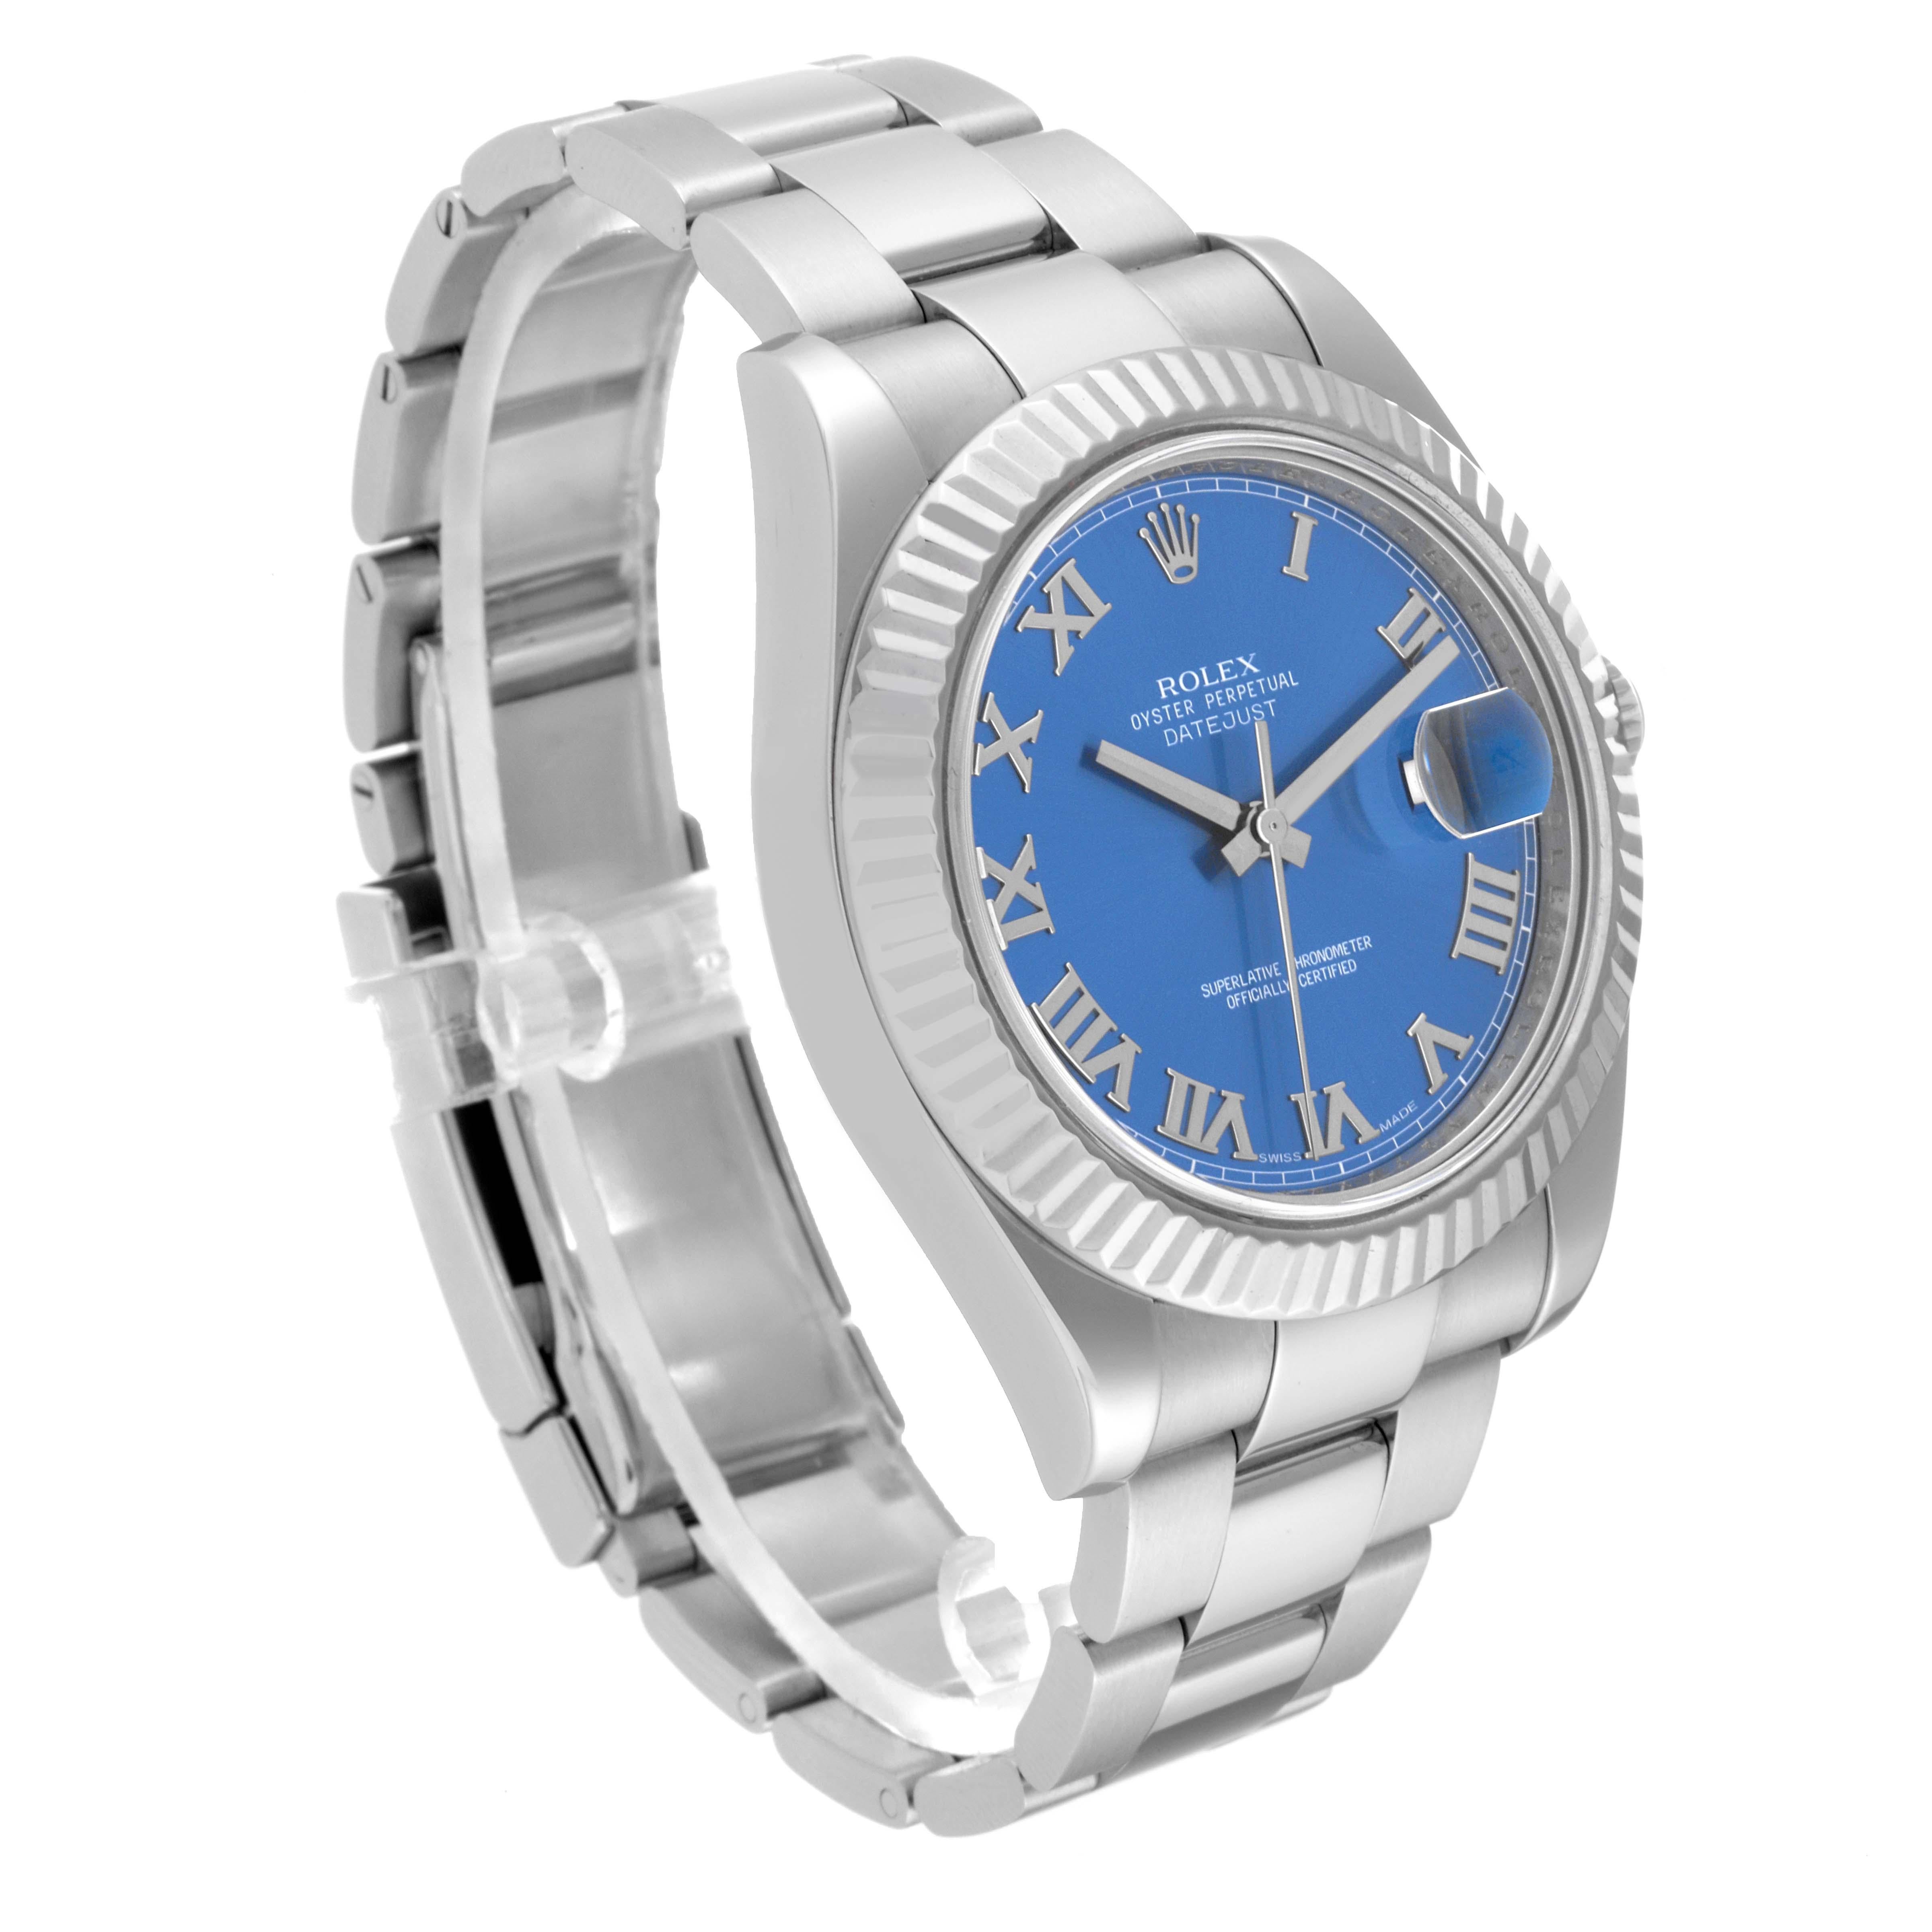 Rolex Datejust II Steel White Gold Blue Roman Dial Mens Watch 116334 For Sale 5